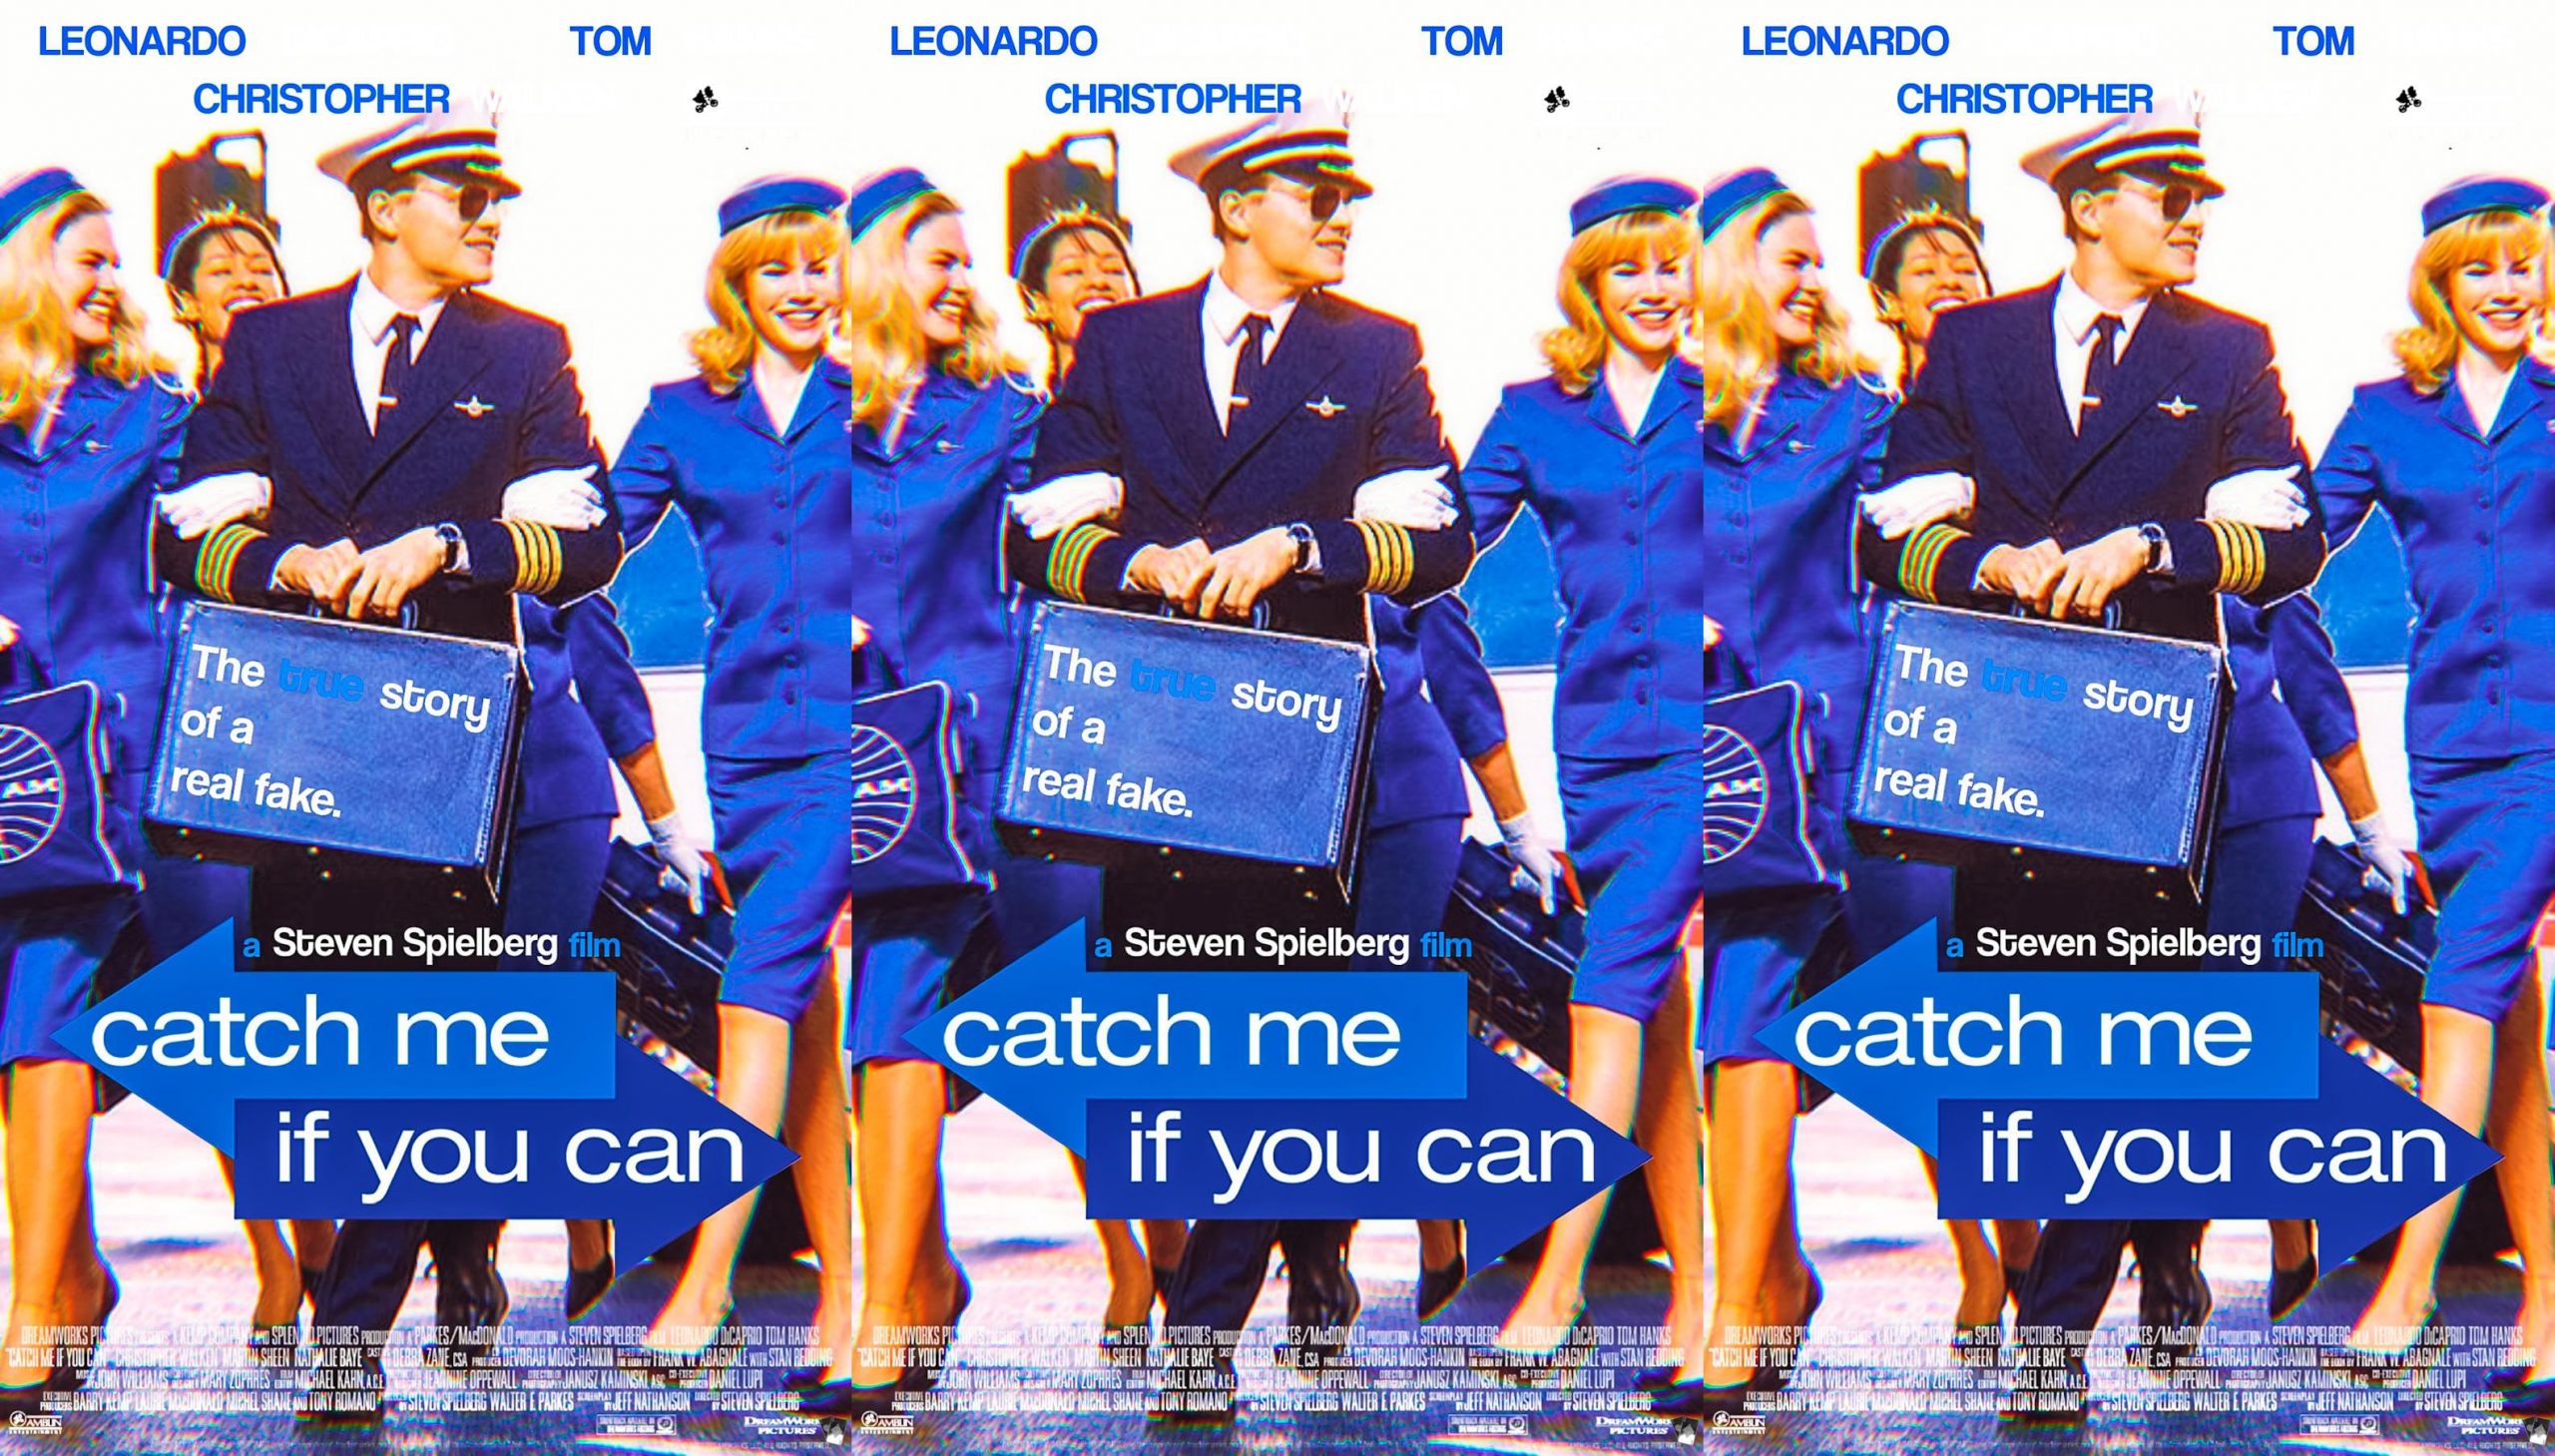 Catch Me If You Can, Amazon Prime Video, Dreamworks Pictures, Kemp Company, Splendid Pictures, Parkes/MacDonald Image Nation, Amblin Entertainment, Muse Entertainment Enterprises, The Kennedy/Marshall Company